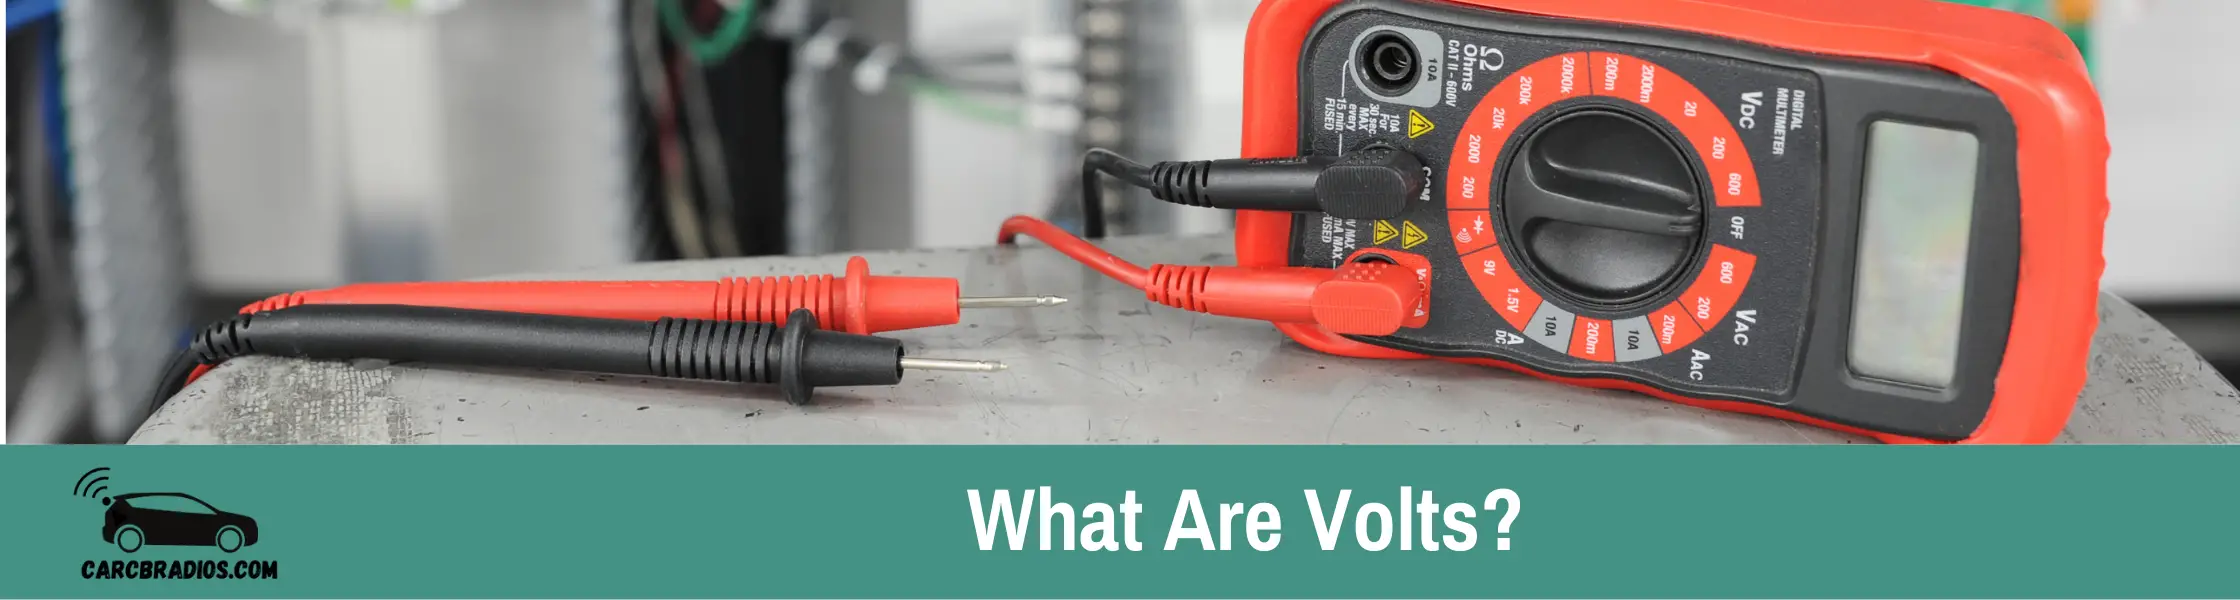 Volts is simply electricity pressure measured in volts (V).  It is used to measure the amount of power that goes into a device whether it's AC or DC appliances.